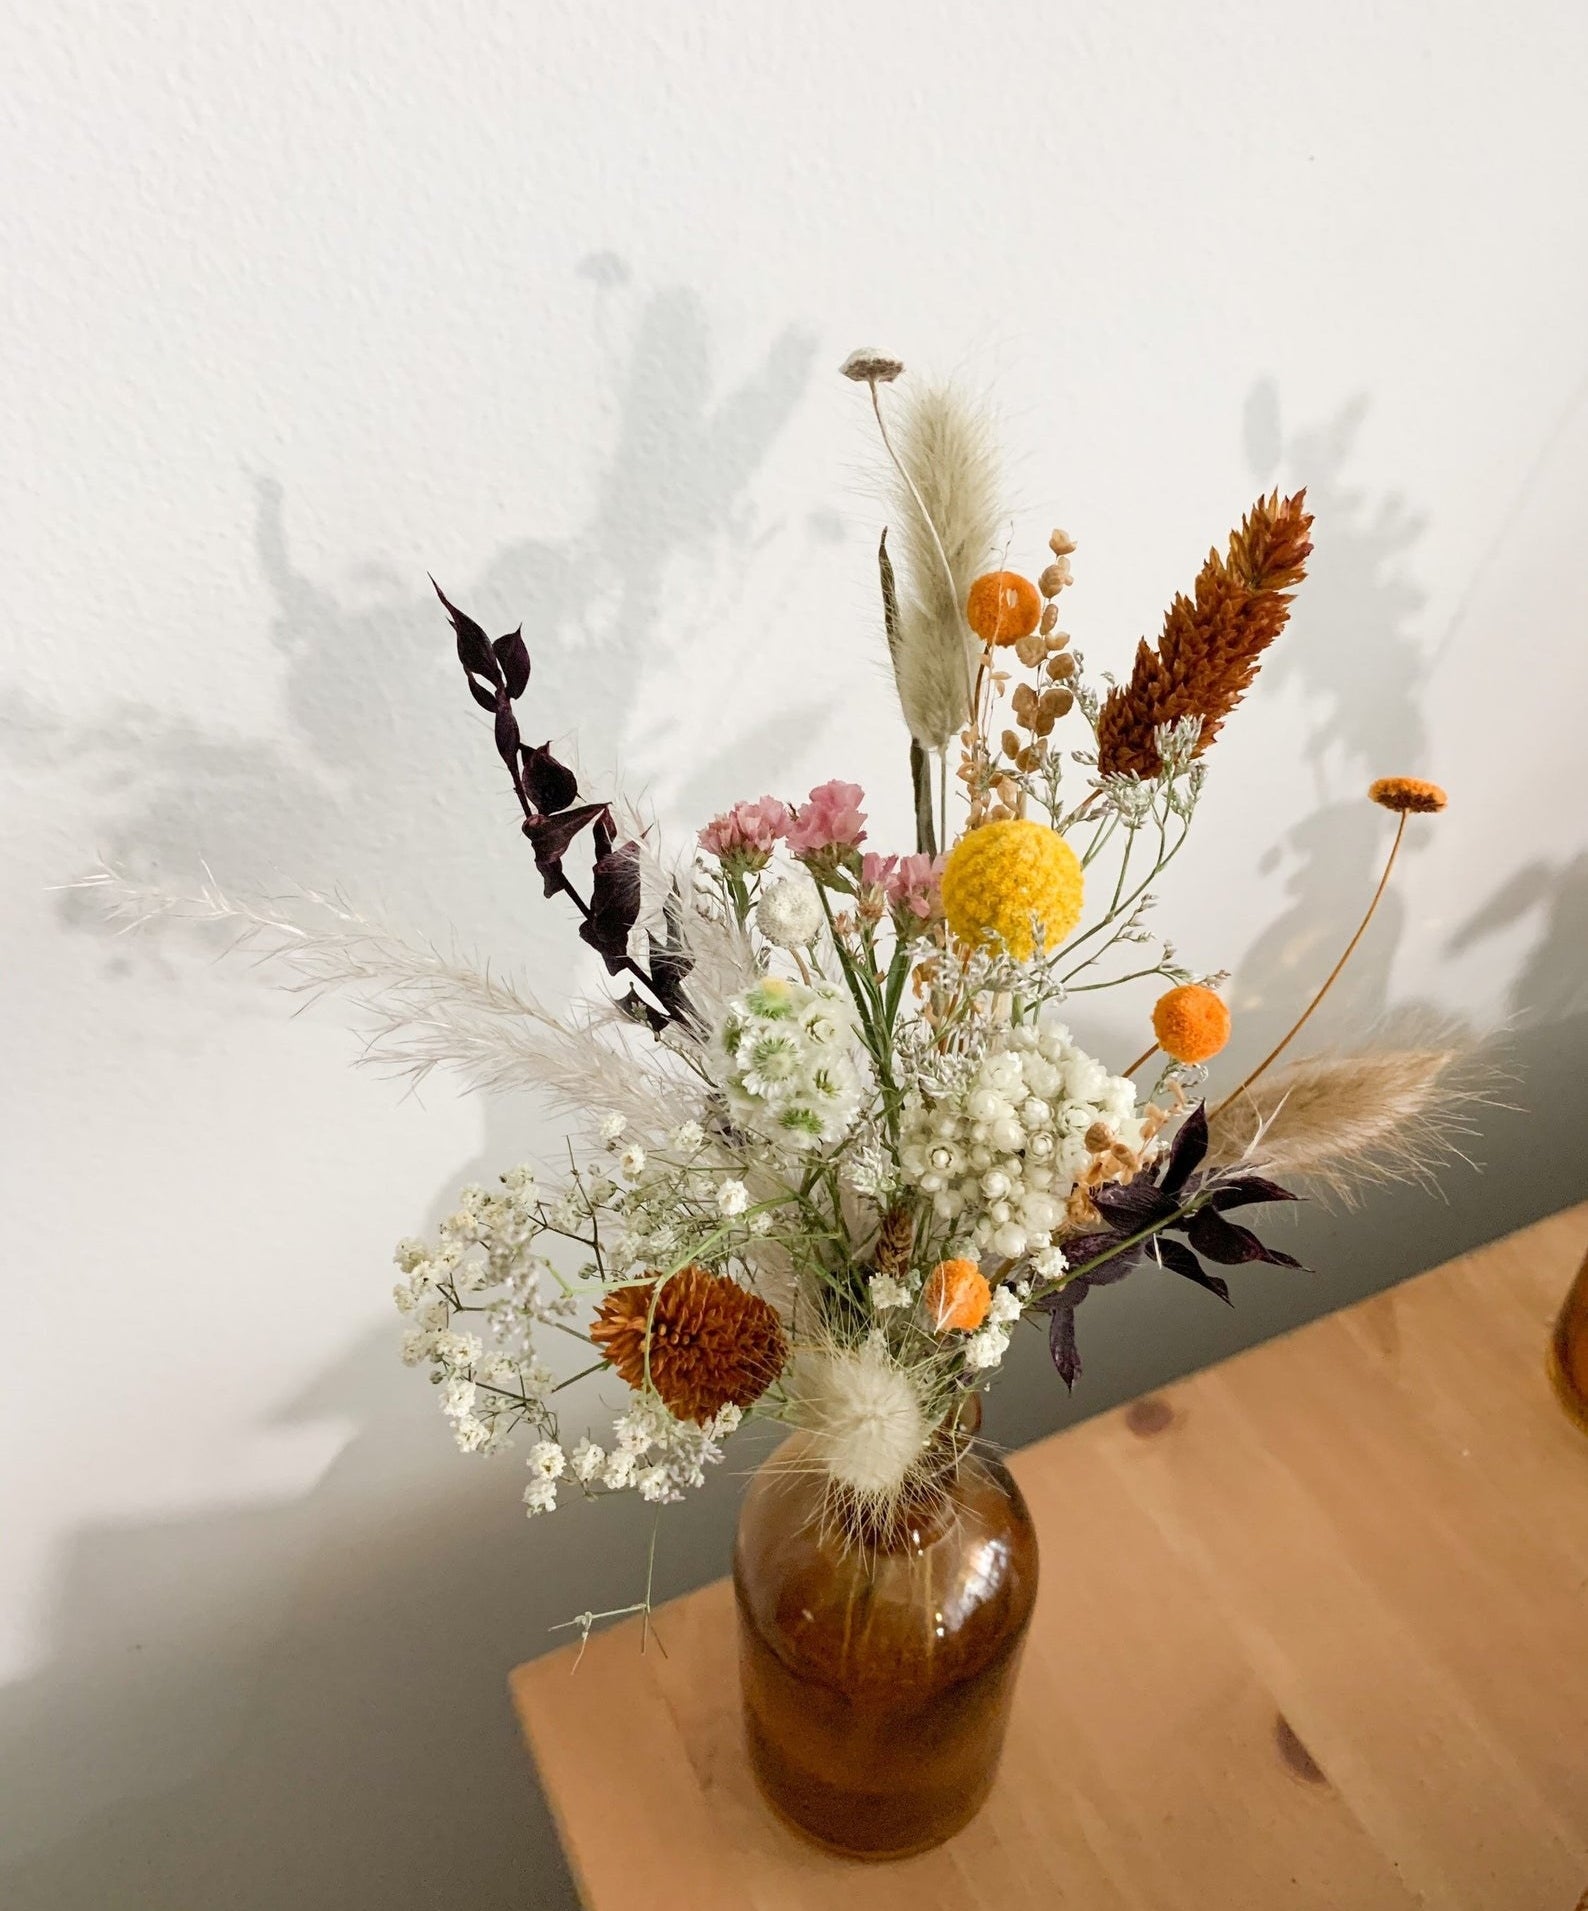 the rustic dried arrangement in an amber vase